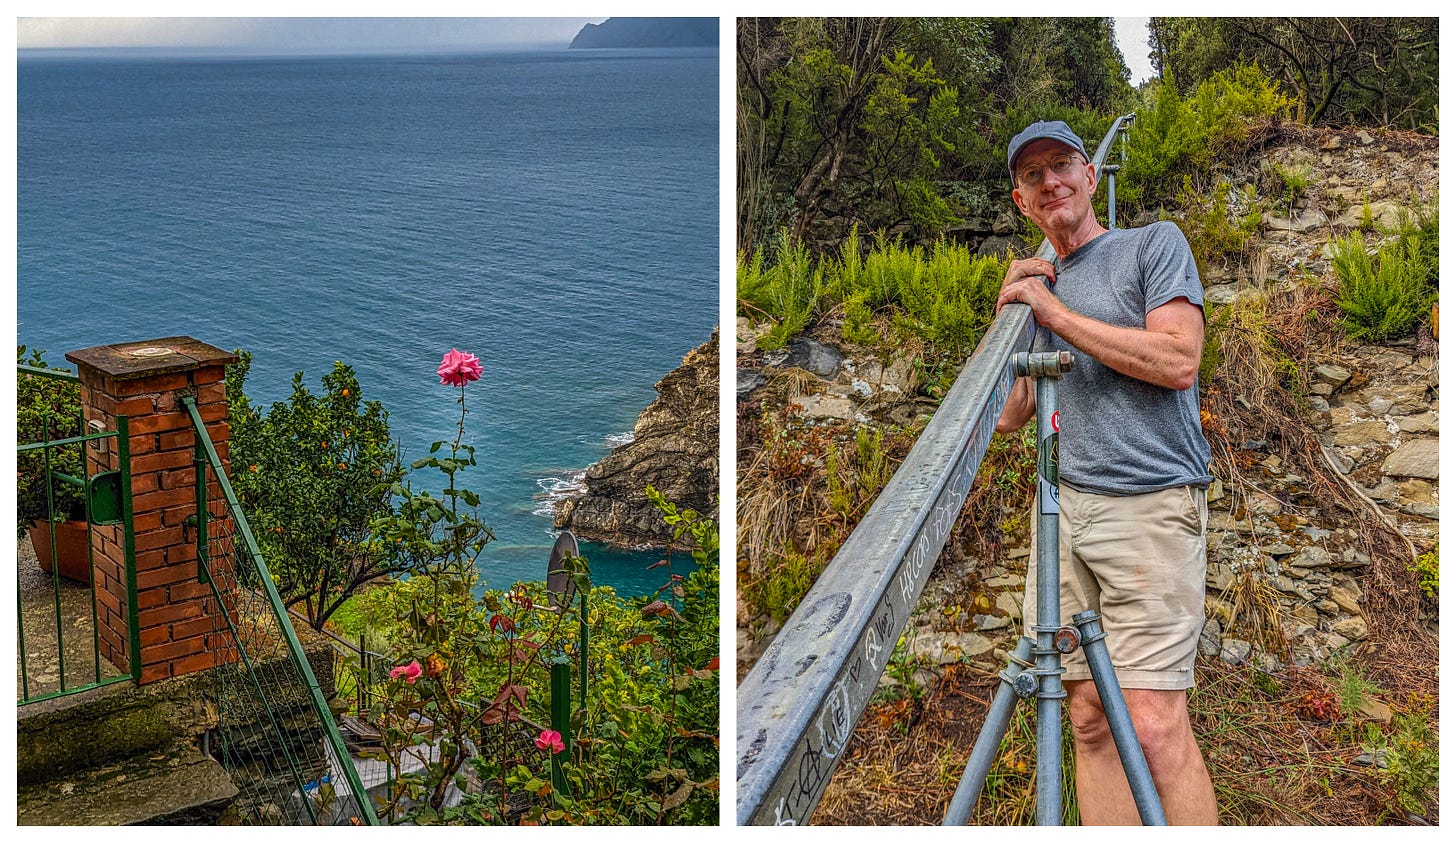 The photo on the left shows the view from a house, a single rose bright against the blue ocean. The photo on the right shows Brent standing in front of a section of the track used to haul olives up the hillside. 